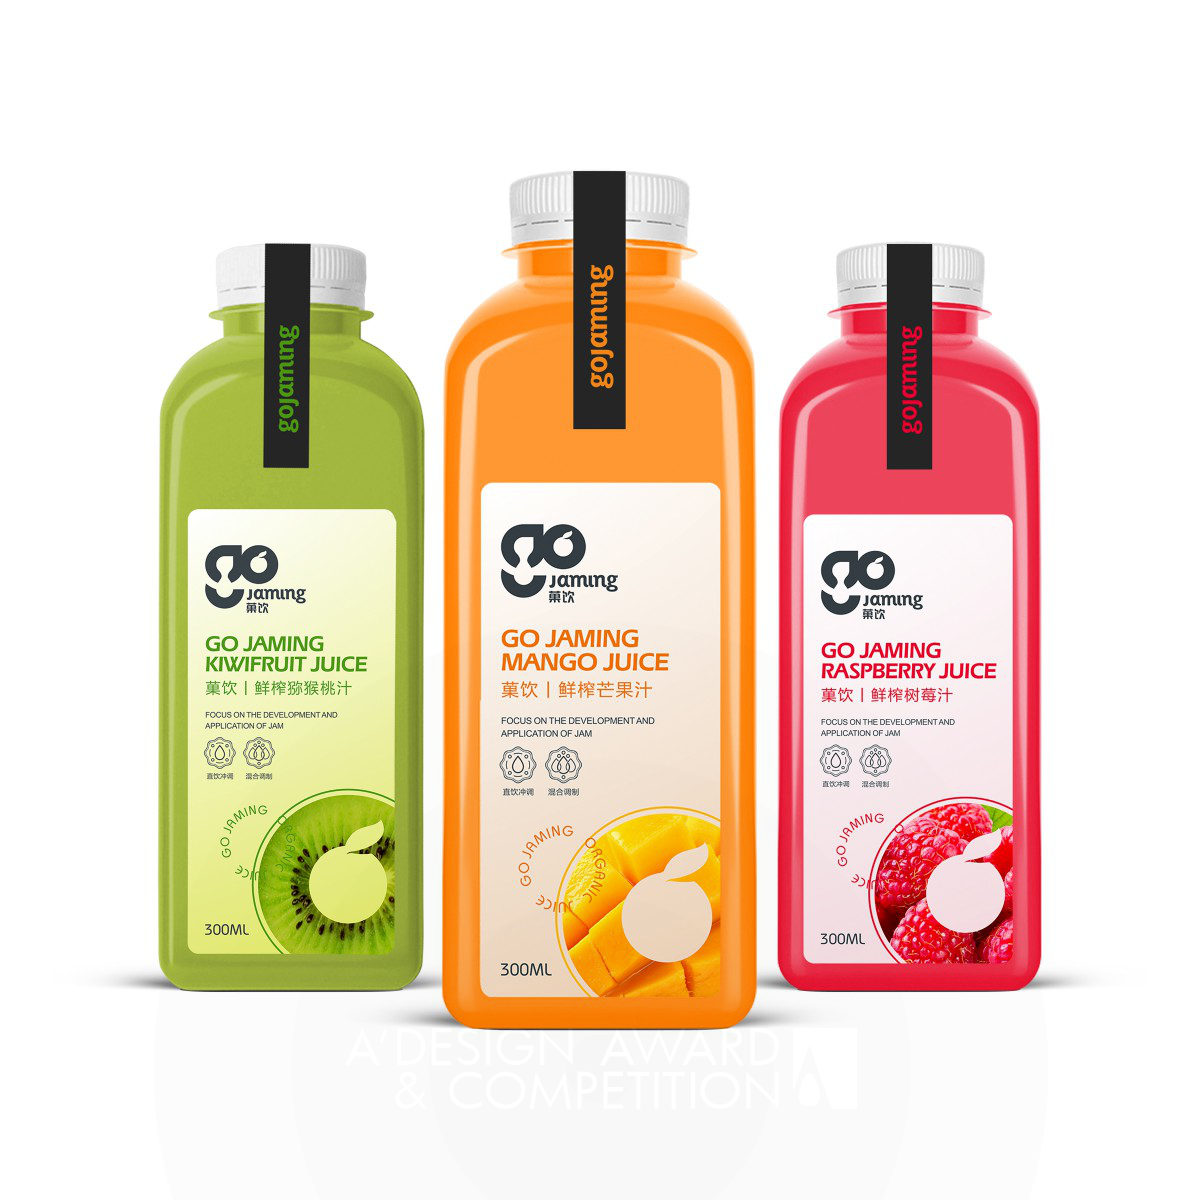 Qichao An wins Iron at the prestigious A' Packaging Design Award with Gojaming Juice Packaging.